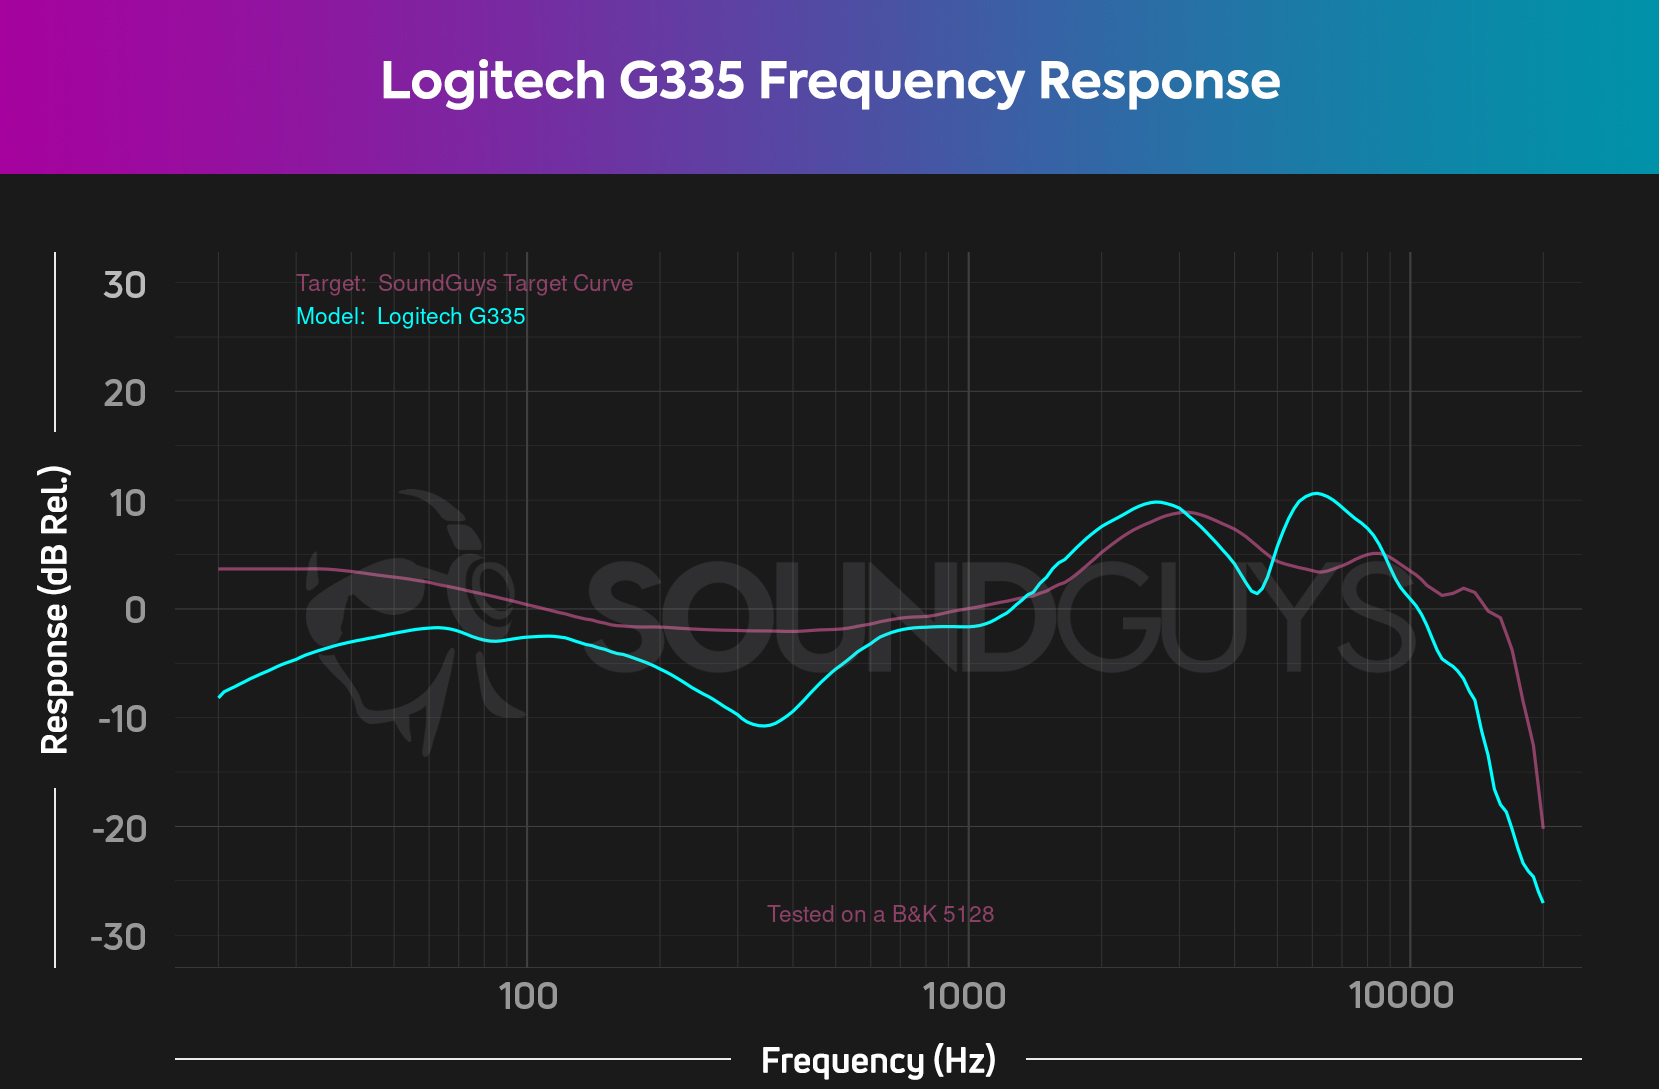 The Logitech G335 frequency response chart, showing very uneven performance across the board.